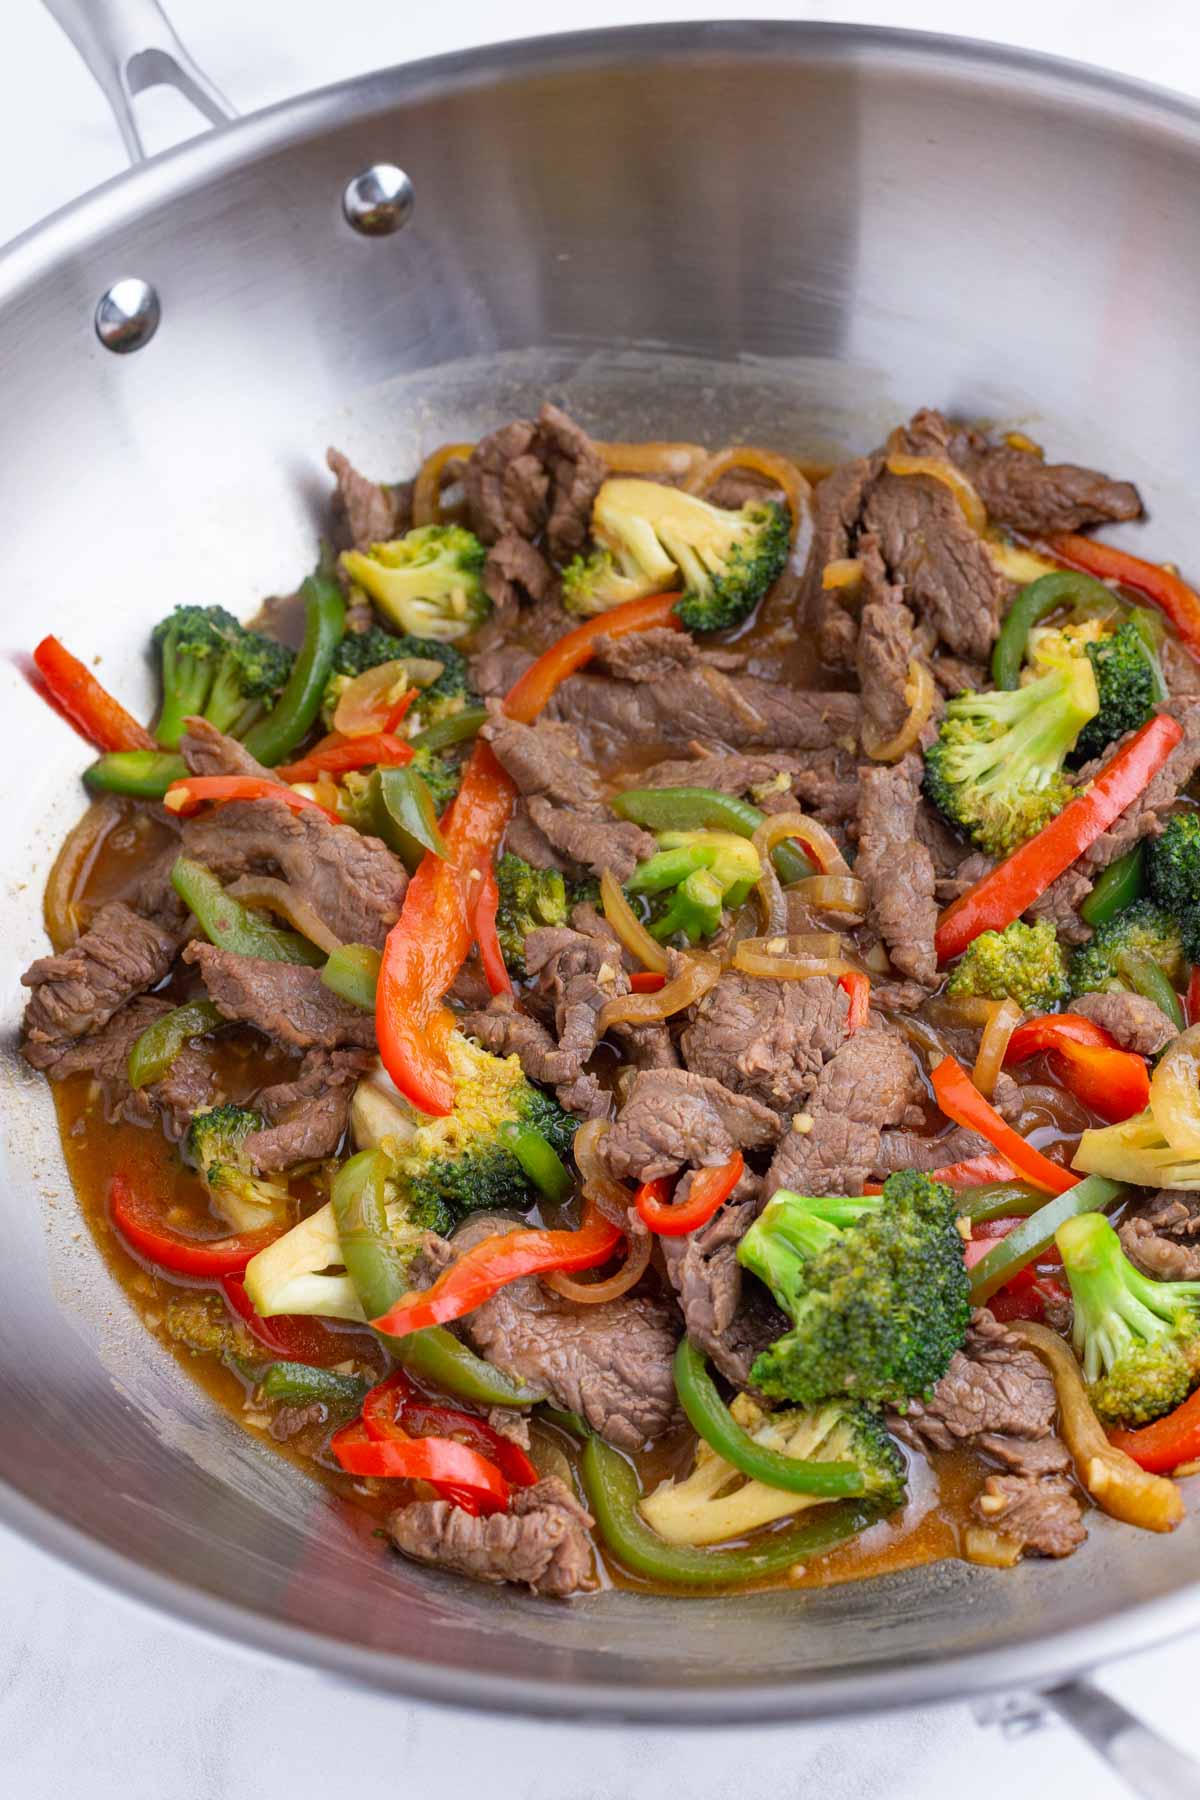 The stir-fry is cooked in a skillet.